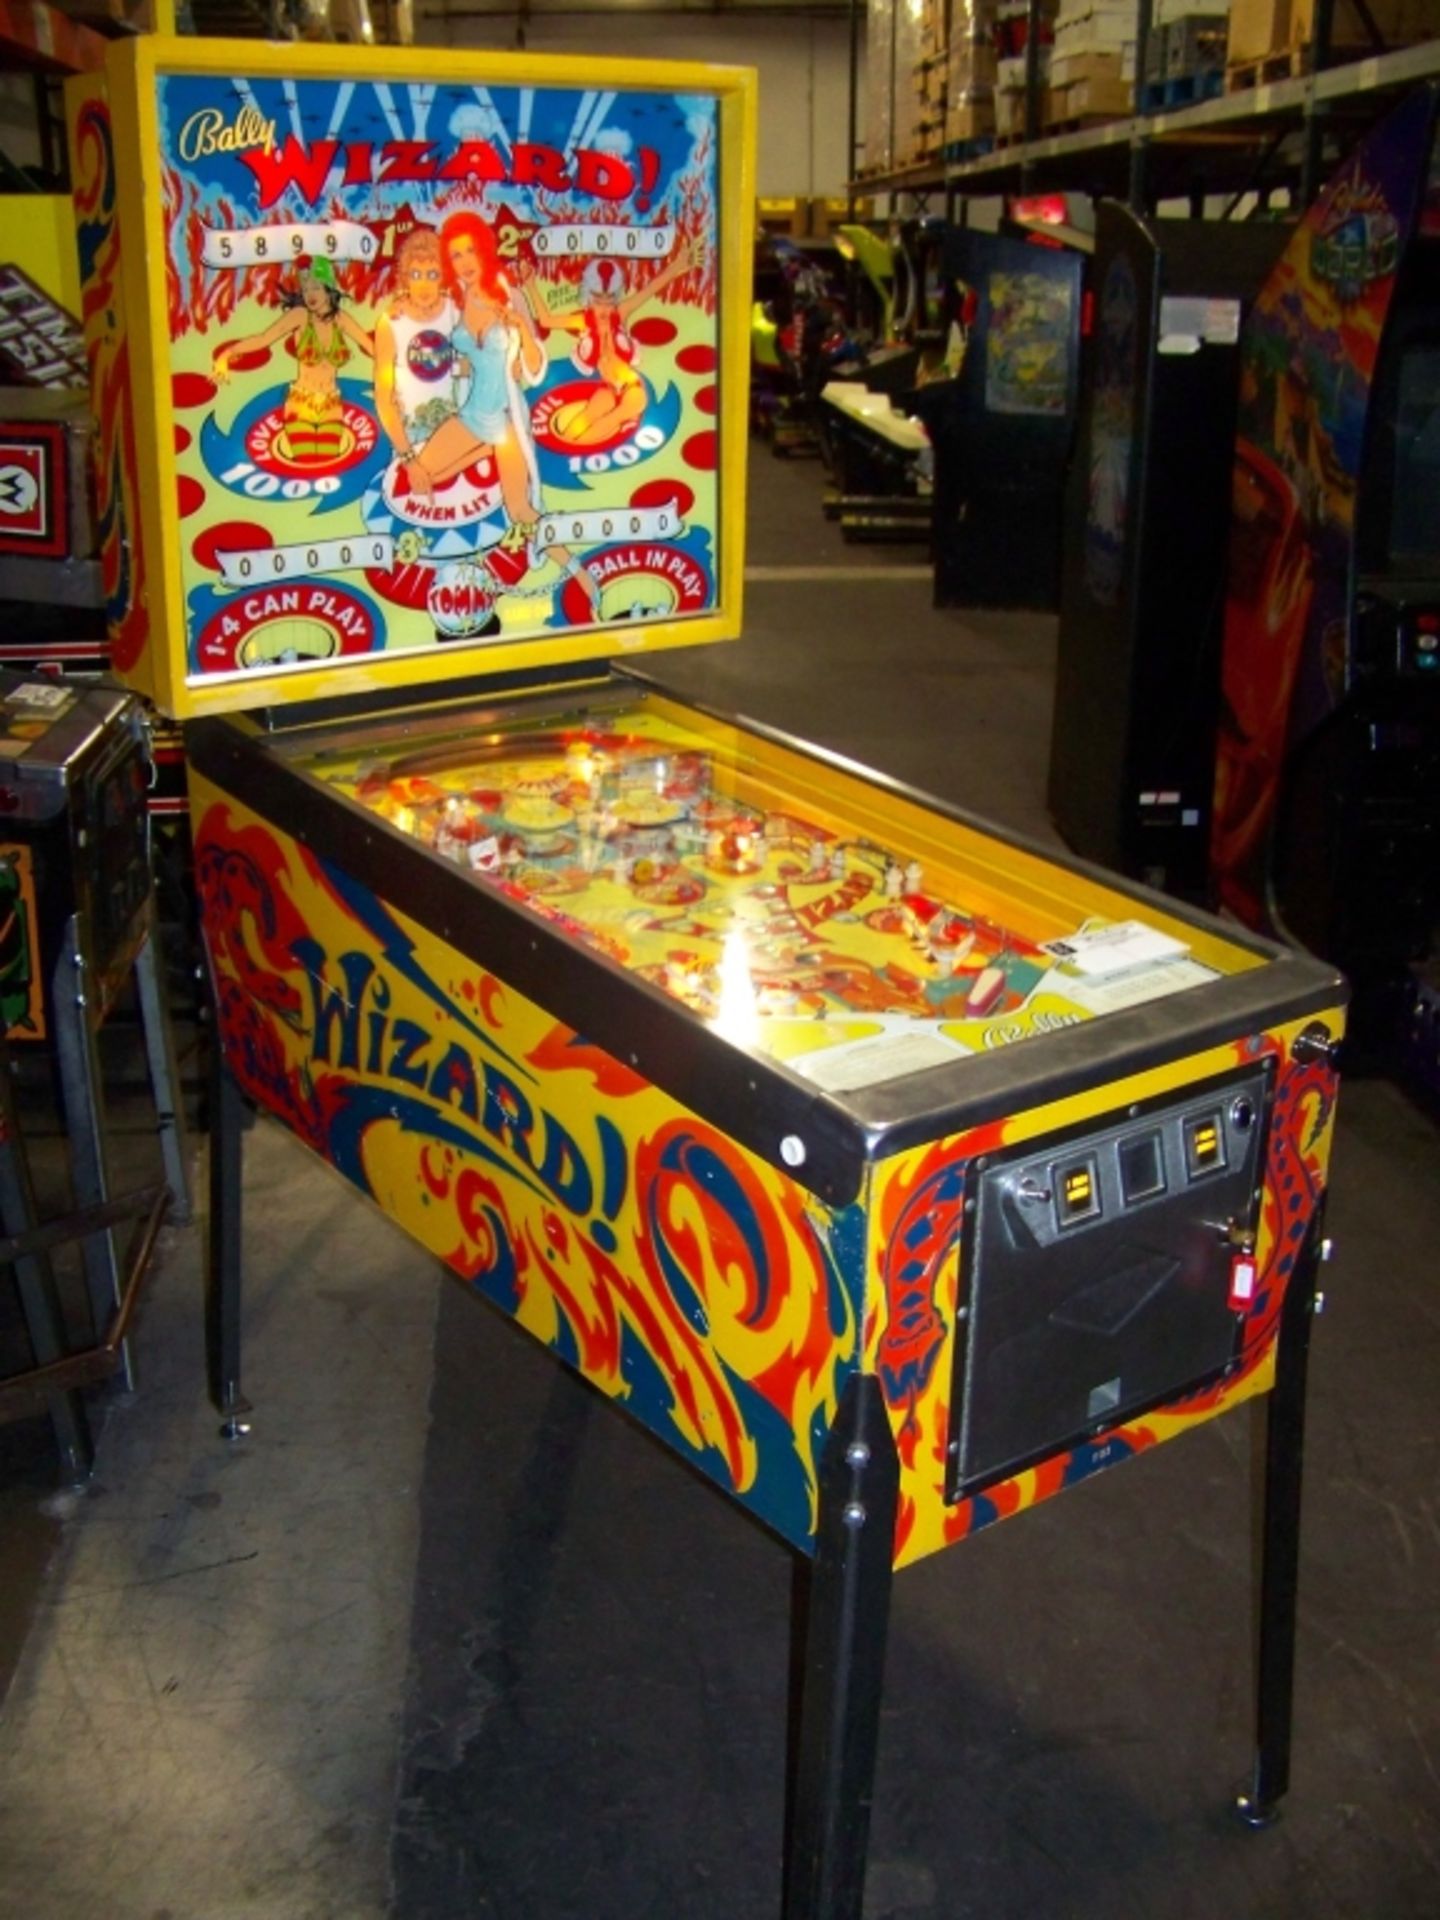 WIZARD! PINBALL MACHINE BALLY E.M. 1975 Item is in used condition. Evidence of wear and commercial